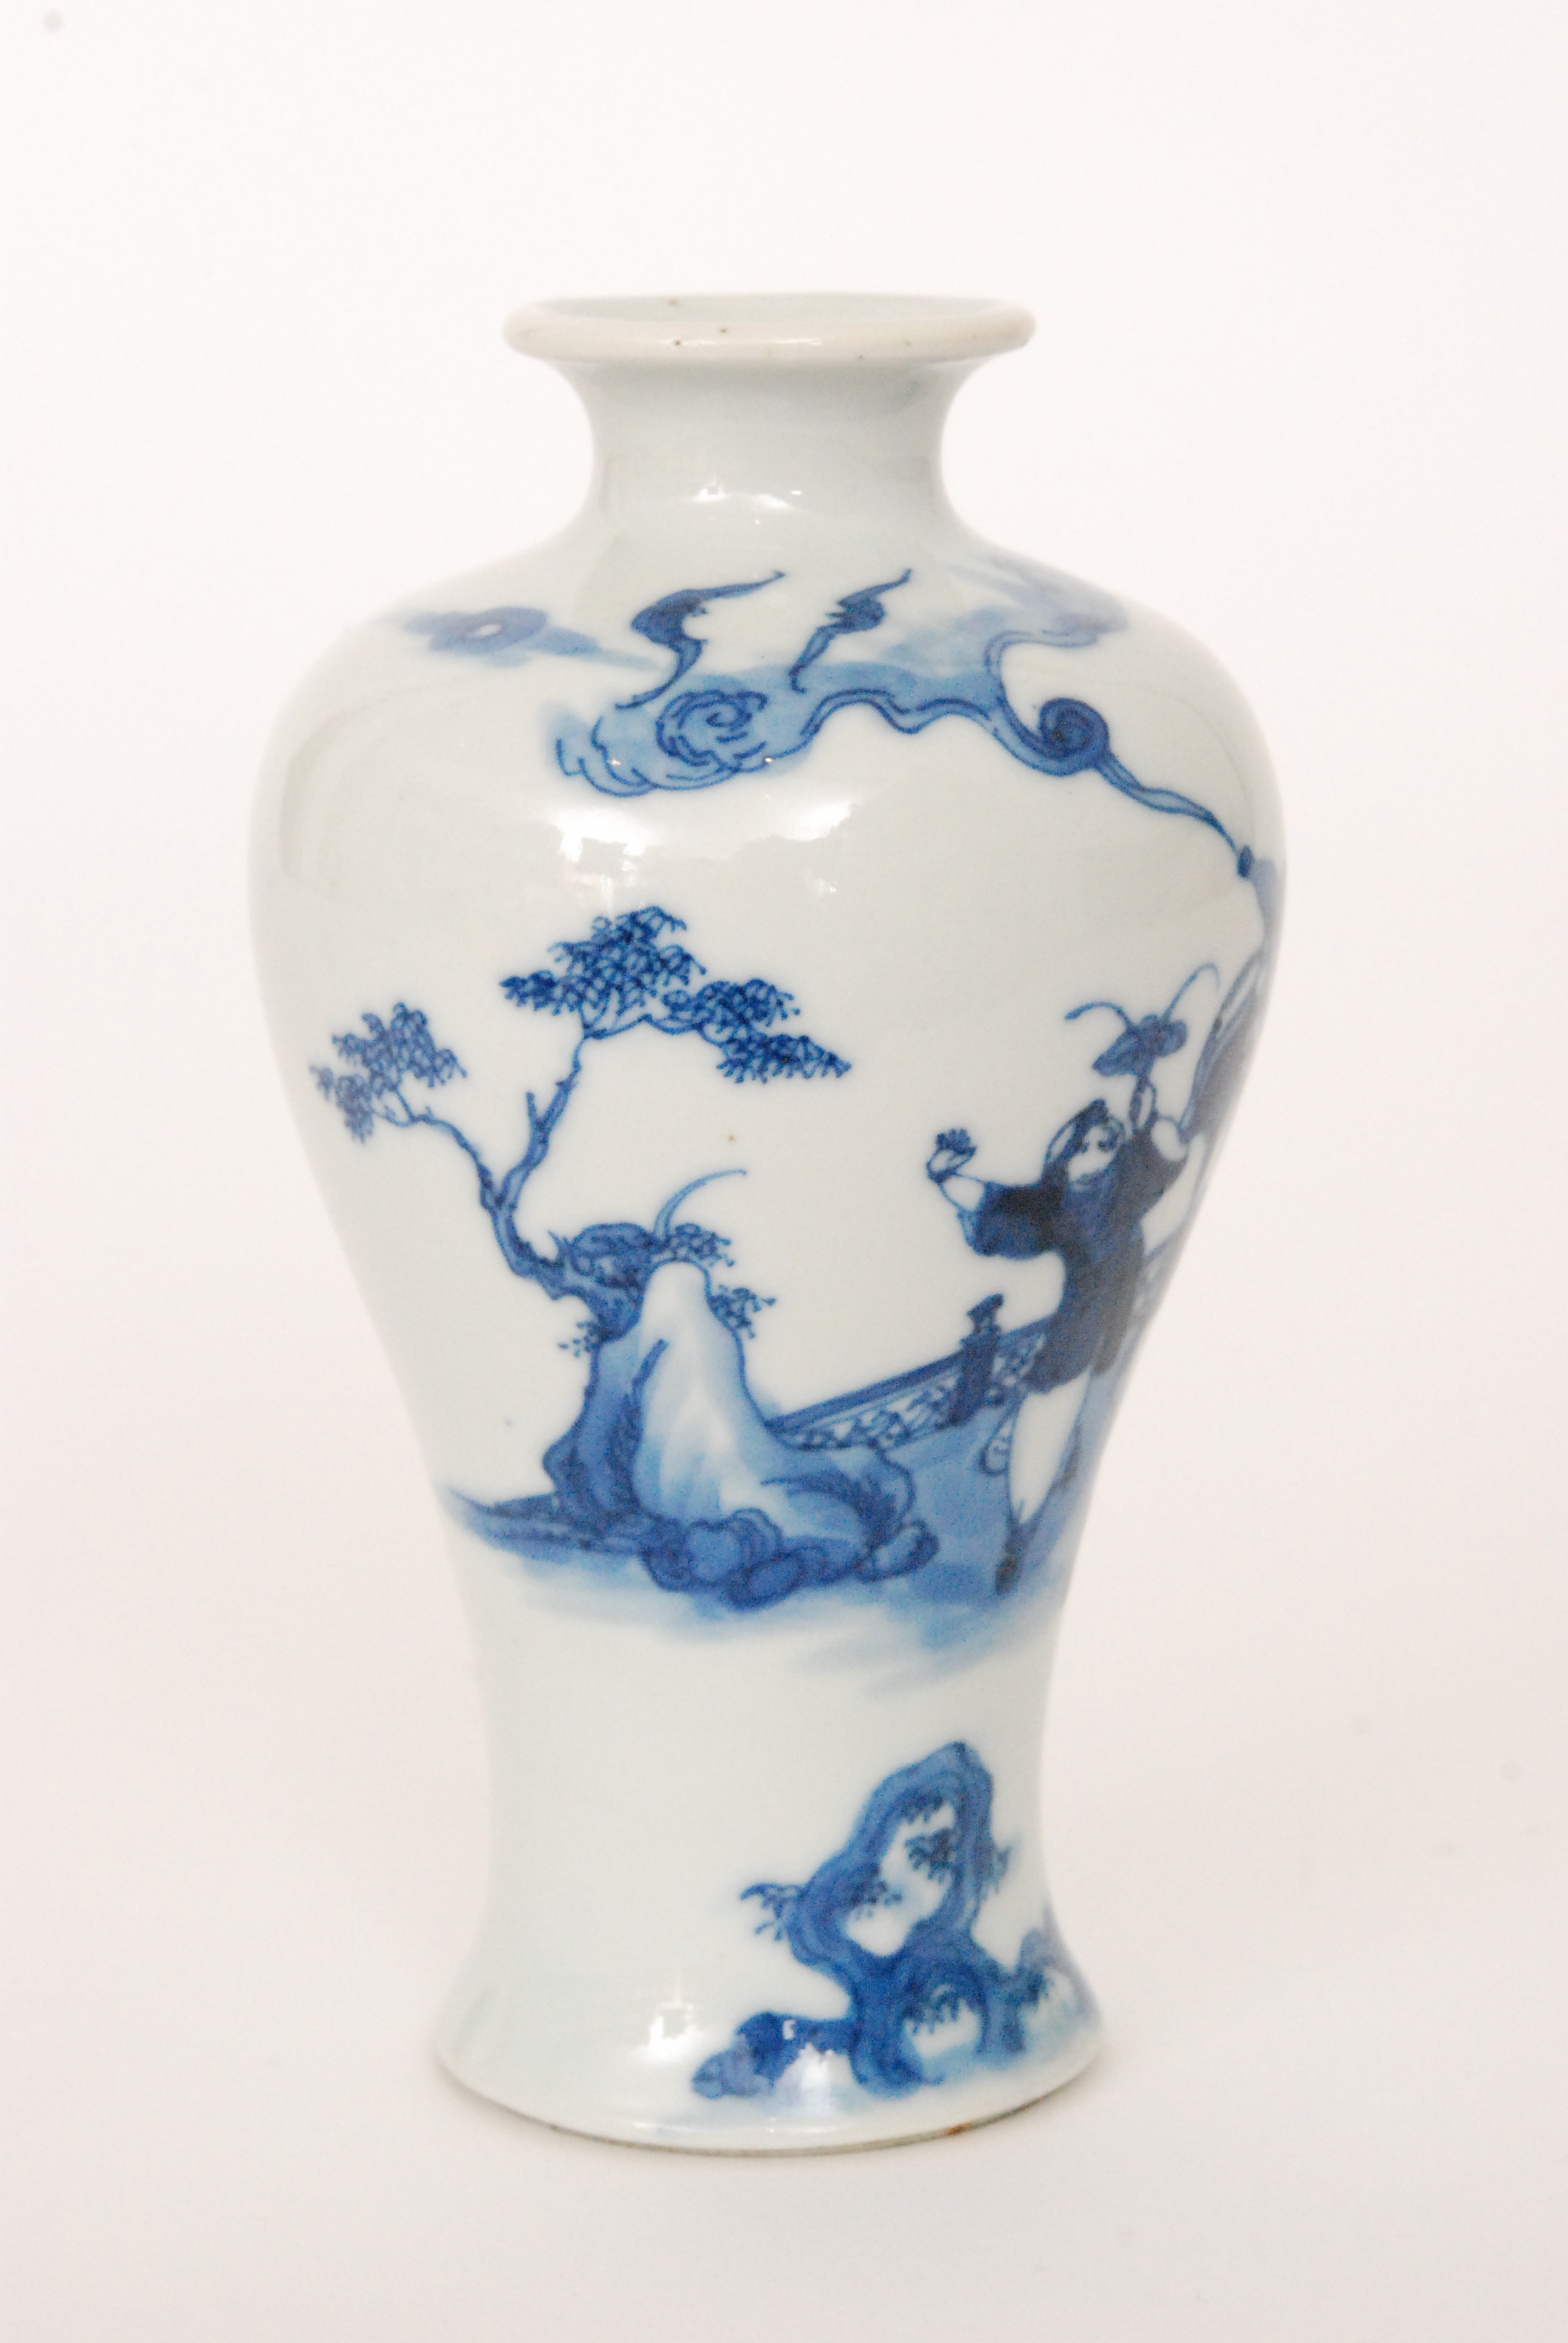 A Chinese Qing Dynasty 18th Century porcelain vase of baluster form hand painted in underglaze blue - Image 5 of 7